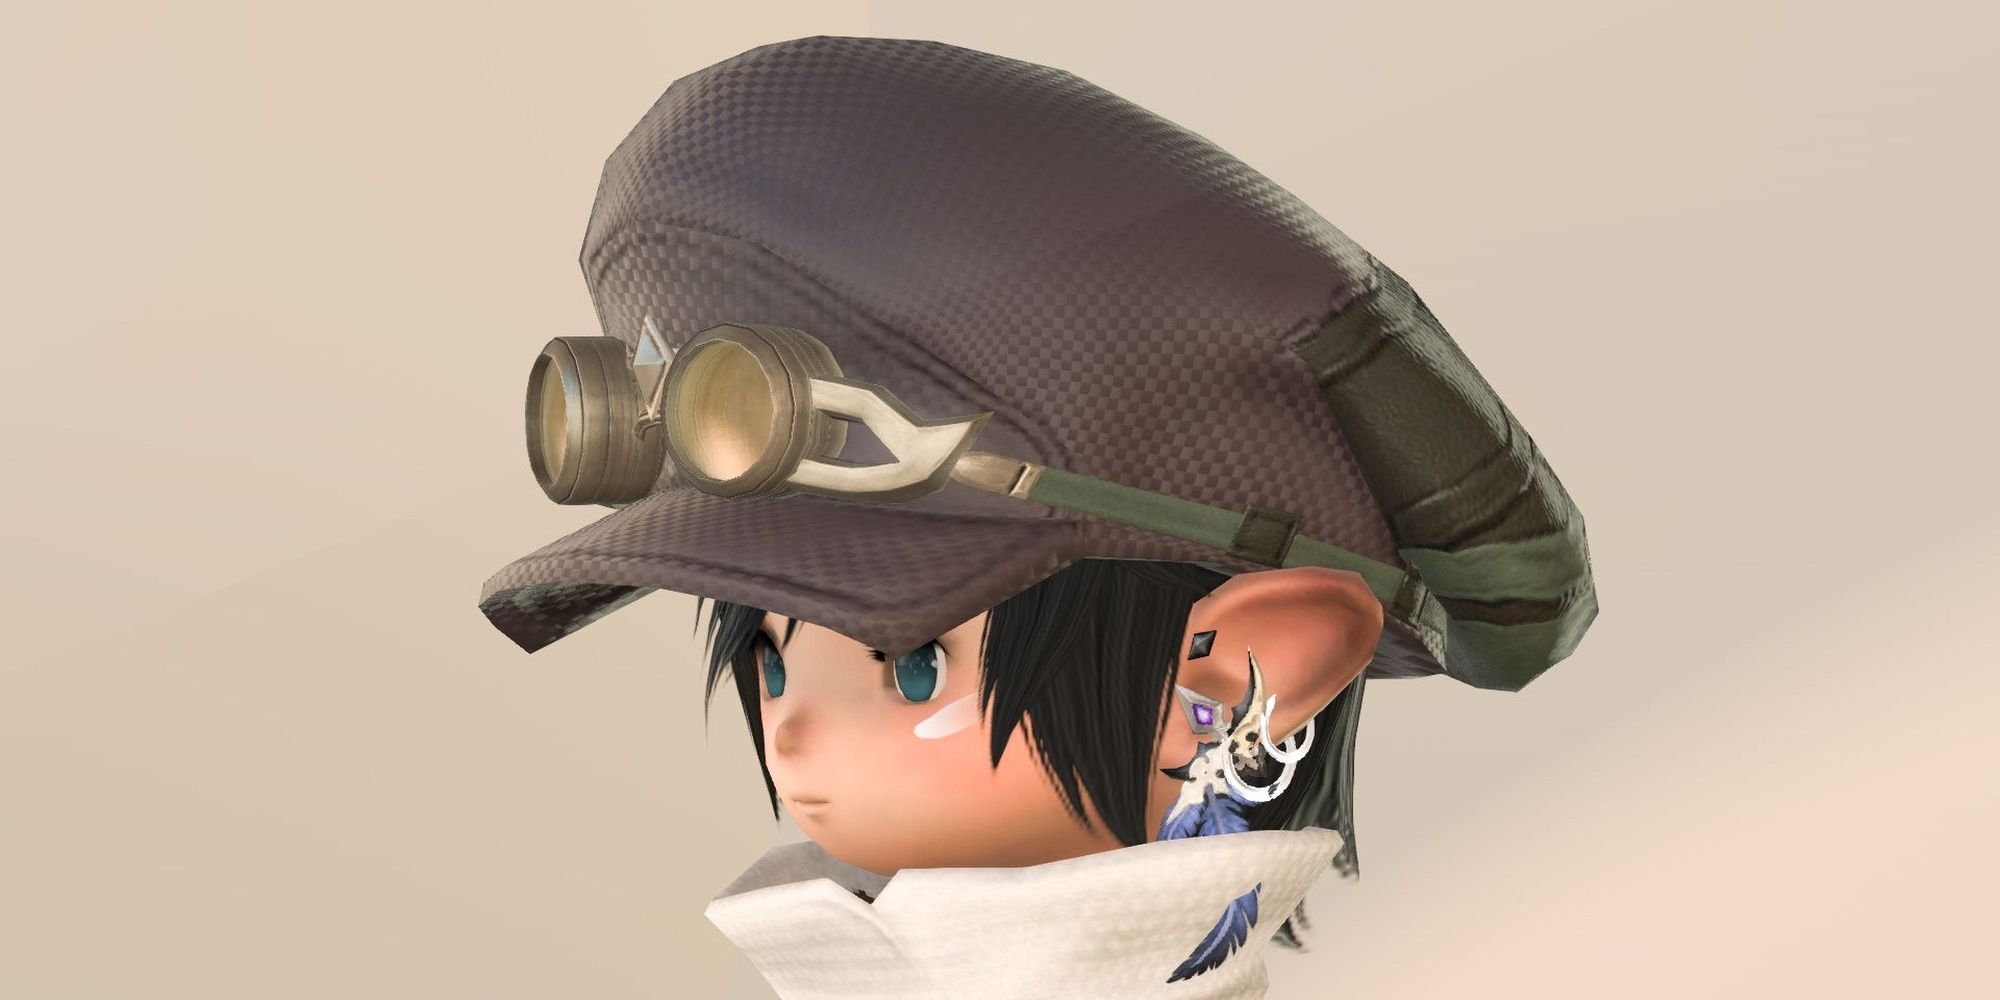 Final Fantasy 14 Lalafel In Steampunk Hat With Goggles Close Up